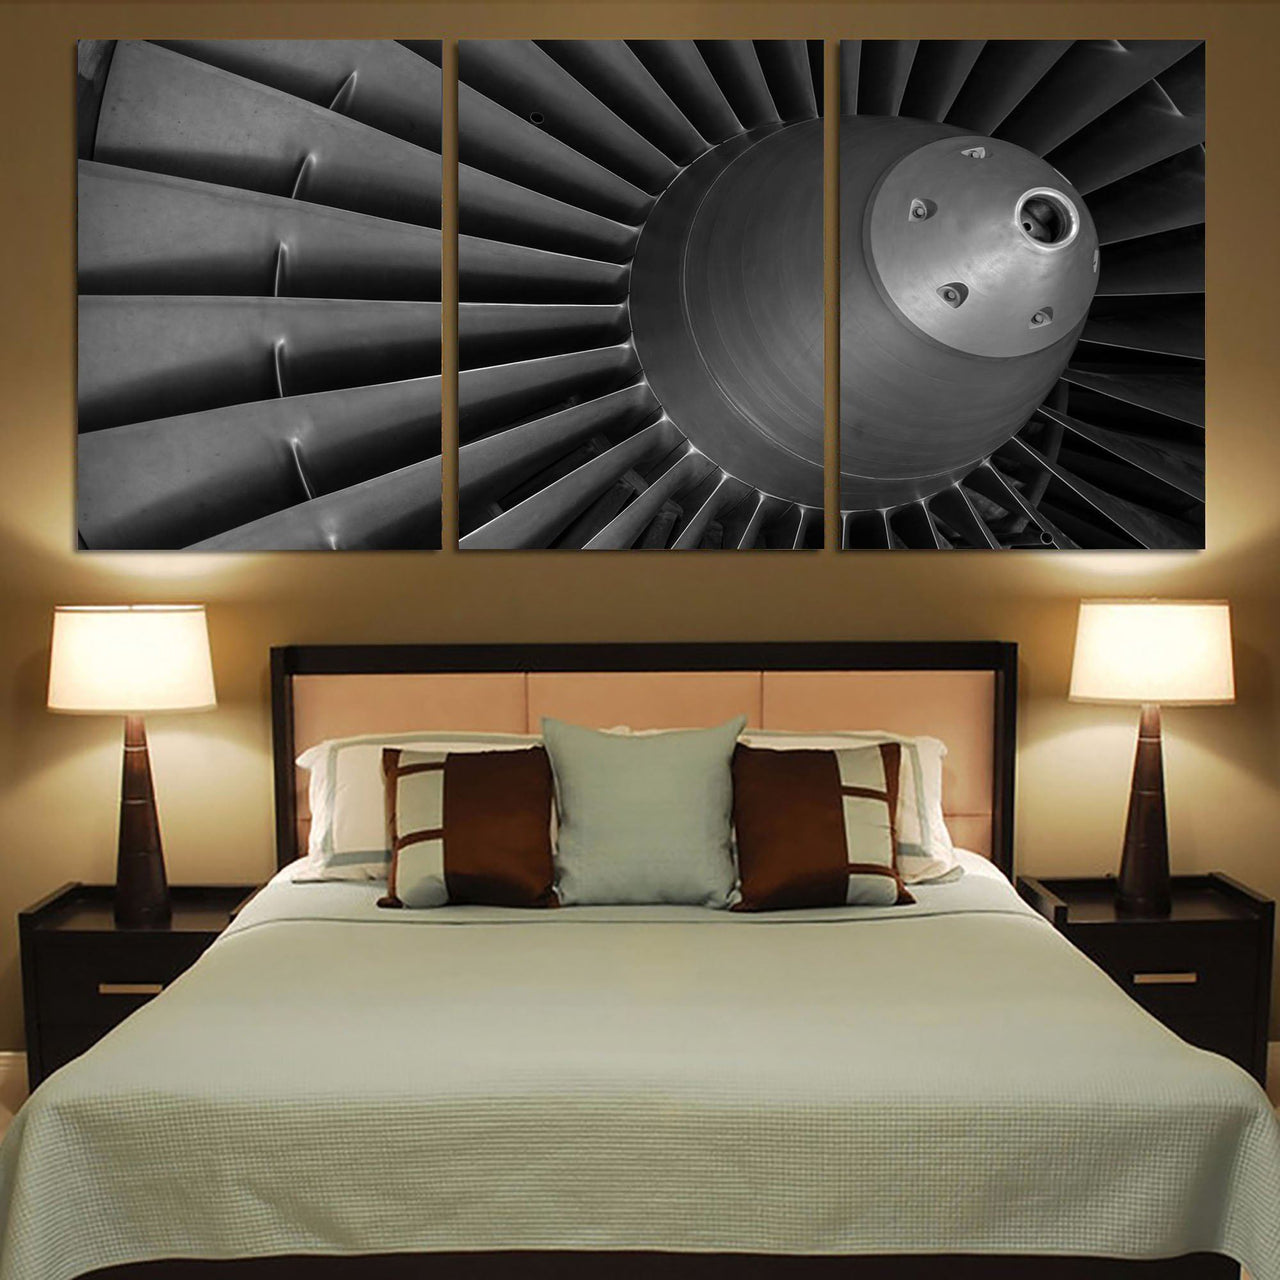 Super View of Jet Engine Printed Canvas Posters (3 Pieces) Aviation Shop 